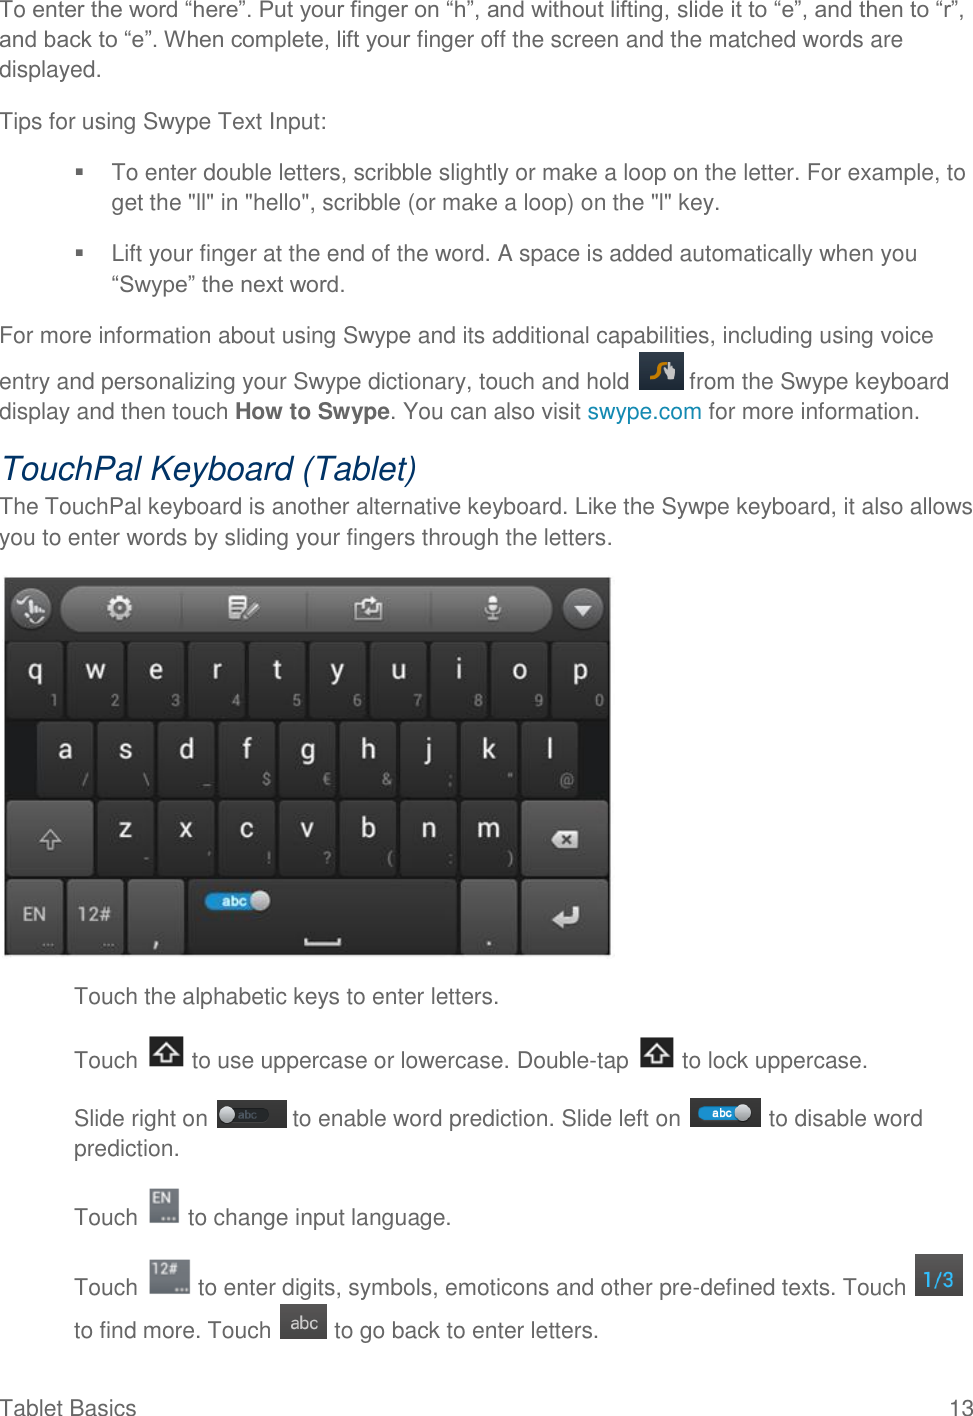  Tablet Basics  13 To enter the word “here”. Put your finger on “h”, and without lifting, slide it to “e”, and then to “r”, and back to “e”. When complete, lift your finger off the screen and the matched words are displayed. Tips for using Swype Text Input:   To enter double letters, scribble slightly or make a loop on the letter. For example, to get the &quot;ll&quot; in &quot;hello&quot;, scribble (or make a loop) on the &quot;l&quot; key.   Lift your finger at the end of the word. A space is added automatically when you “Swype” the next word. For more information about using Swype and its additional capabilities, including using voice entry and personalizing your Swype dictionary, touch and hold   from the Swype keyboard display and then touch How to Swype. You can also visit swype.com for more information. TouchPal Keyboard (Tablet) The TouchPal keyboard is another alternative keyboard. Like the Sywpe keyboard, it also allows you to enter words by sliding your fingers through the letters.  ● Touch the alphabetic keys to enter letters. ● Touch   to use uppercase or lowercase. Double-tap   to lock uppercase. ● Slide right on   to enable word prediction. Slide left on   to disable word prediction. ● Touch   to change input language. ● Touch   to enter digits, symbols, emoticons and other pre-defined texts. Touch   to find more. Touch   to go back to enter letters. 